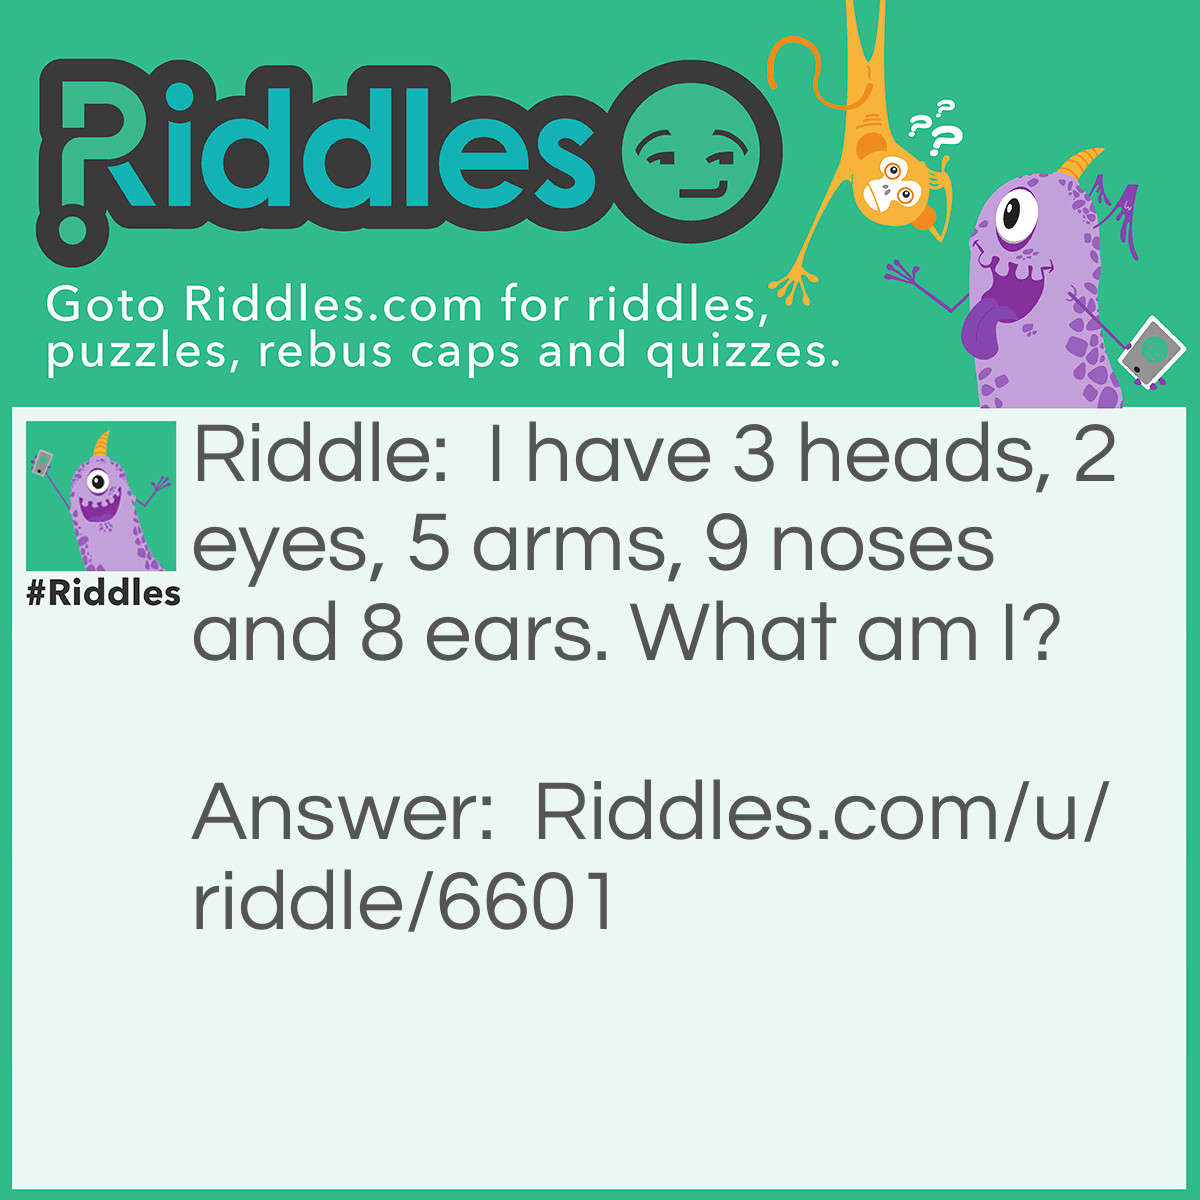 Riddle: I have 3 heads, 2 eyes, 5 arms, 9 noses and 8 ears. What am I? Answer: Ugly.